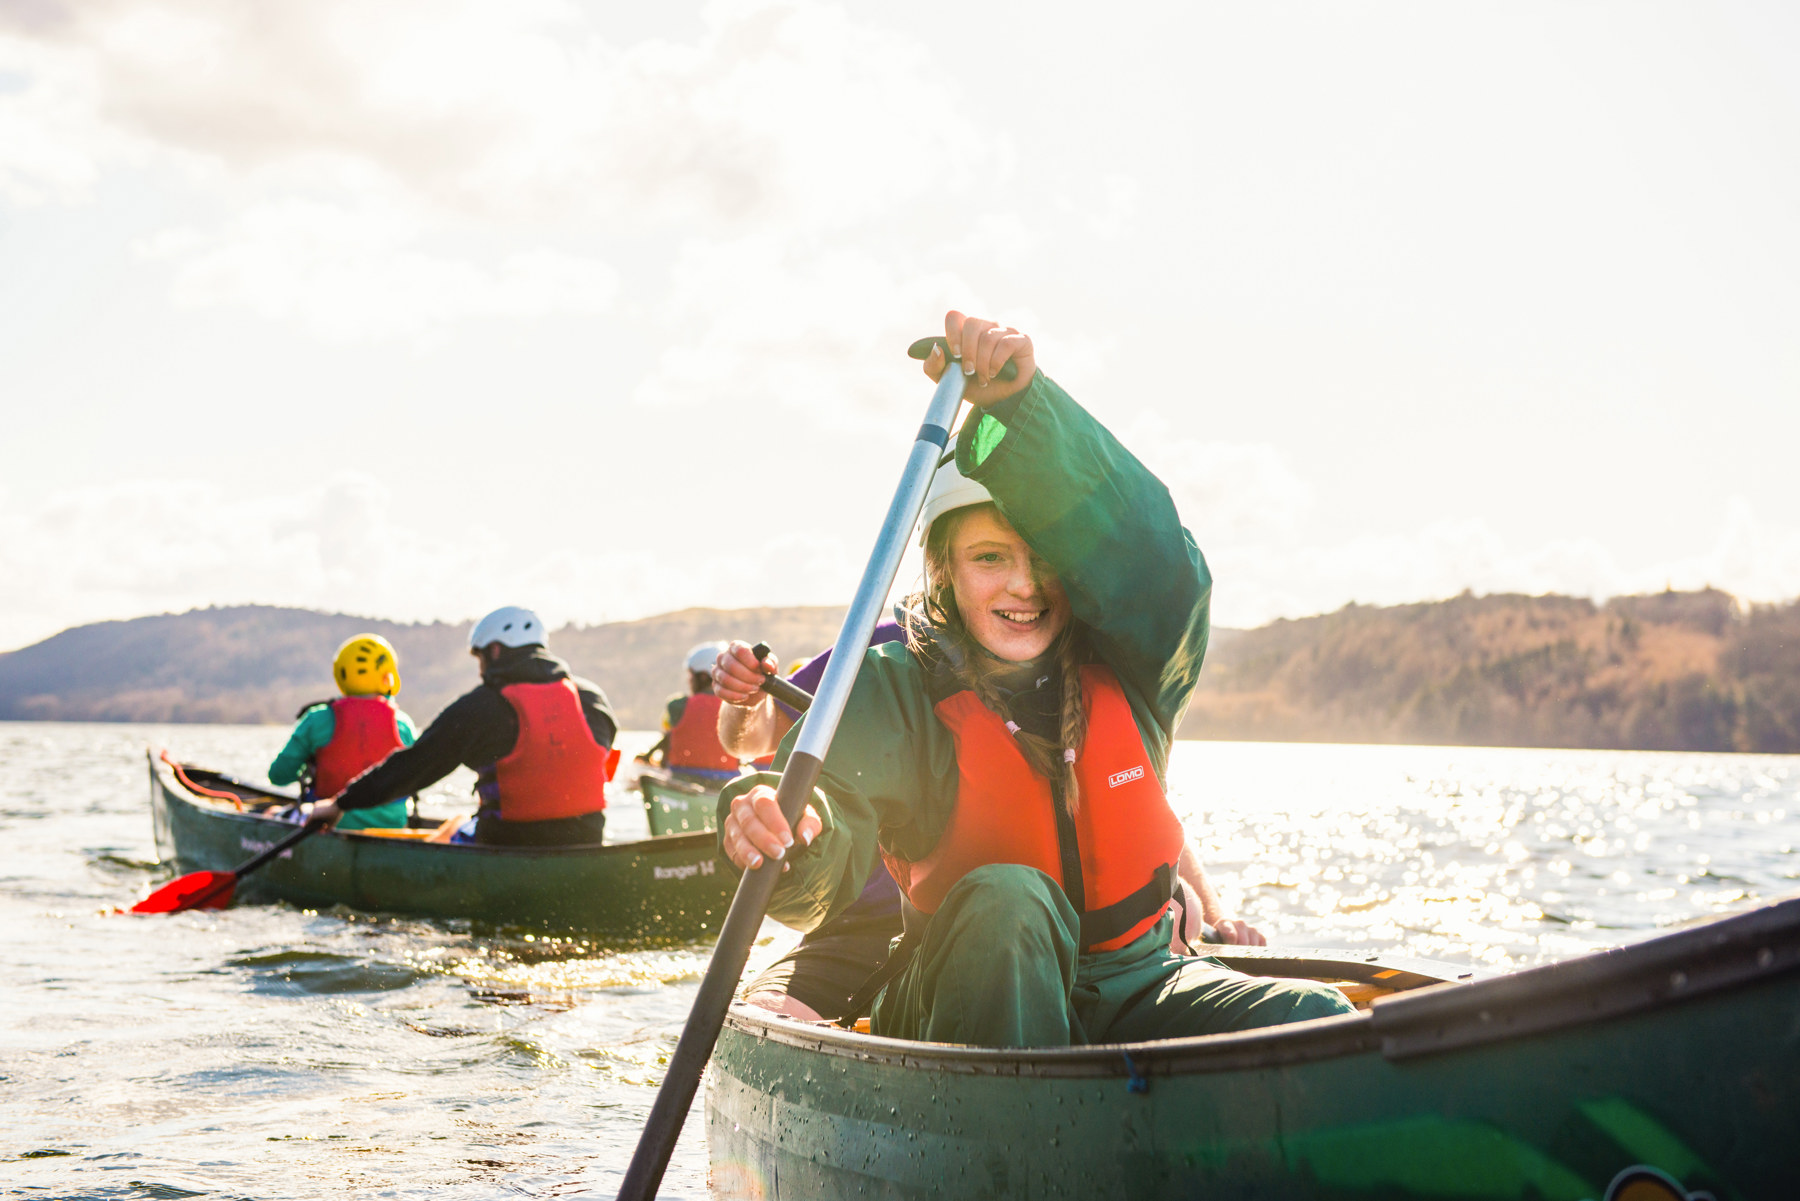 A young person paddling a canoe on open water smiling to the camera. There are other young people in canoes on the water too.